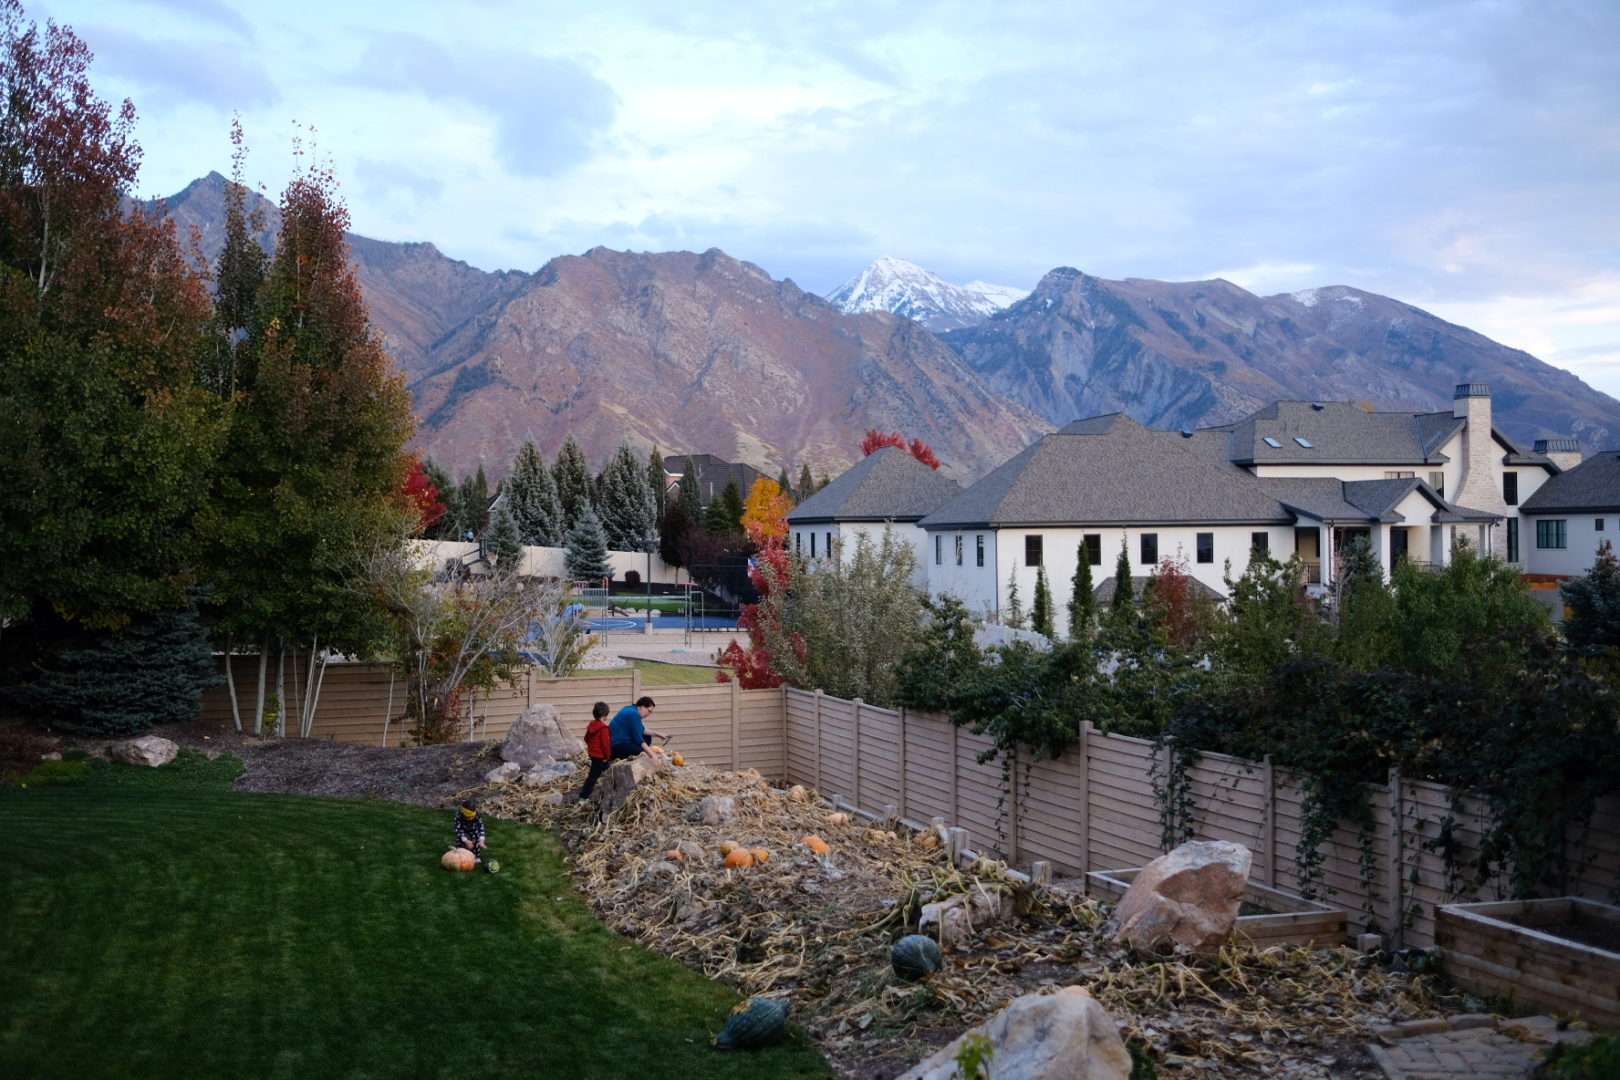 A panoramic view of Alpine and Utah County with a snow capped Mt. Timpanogos in the distance and a family in a pumpkin patch in the foreground.